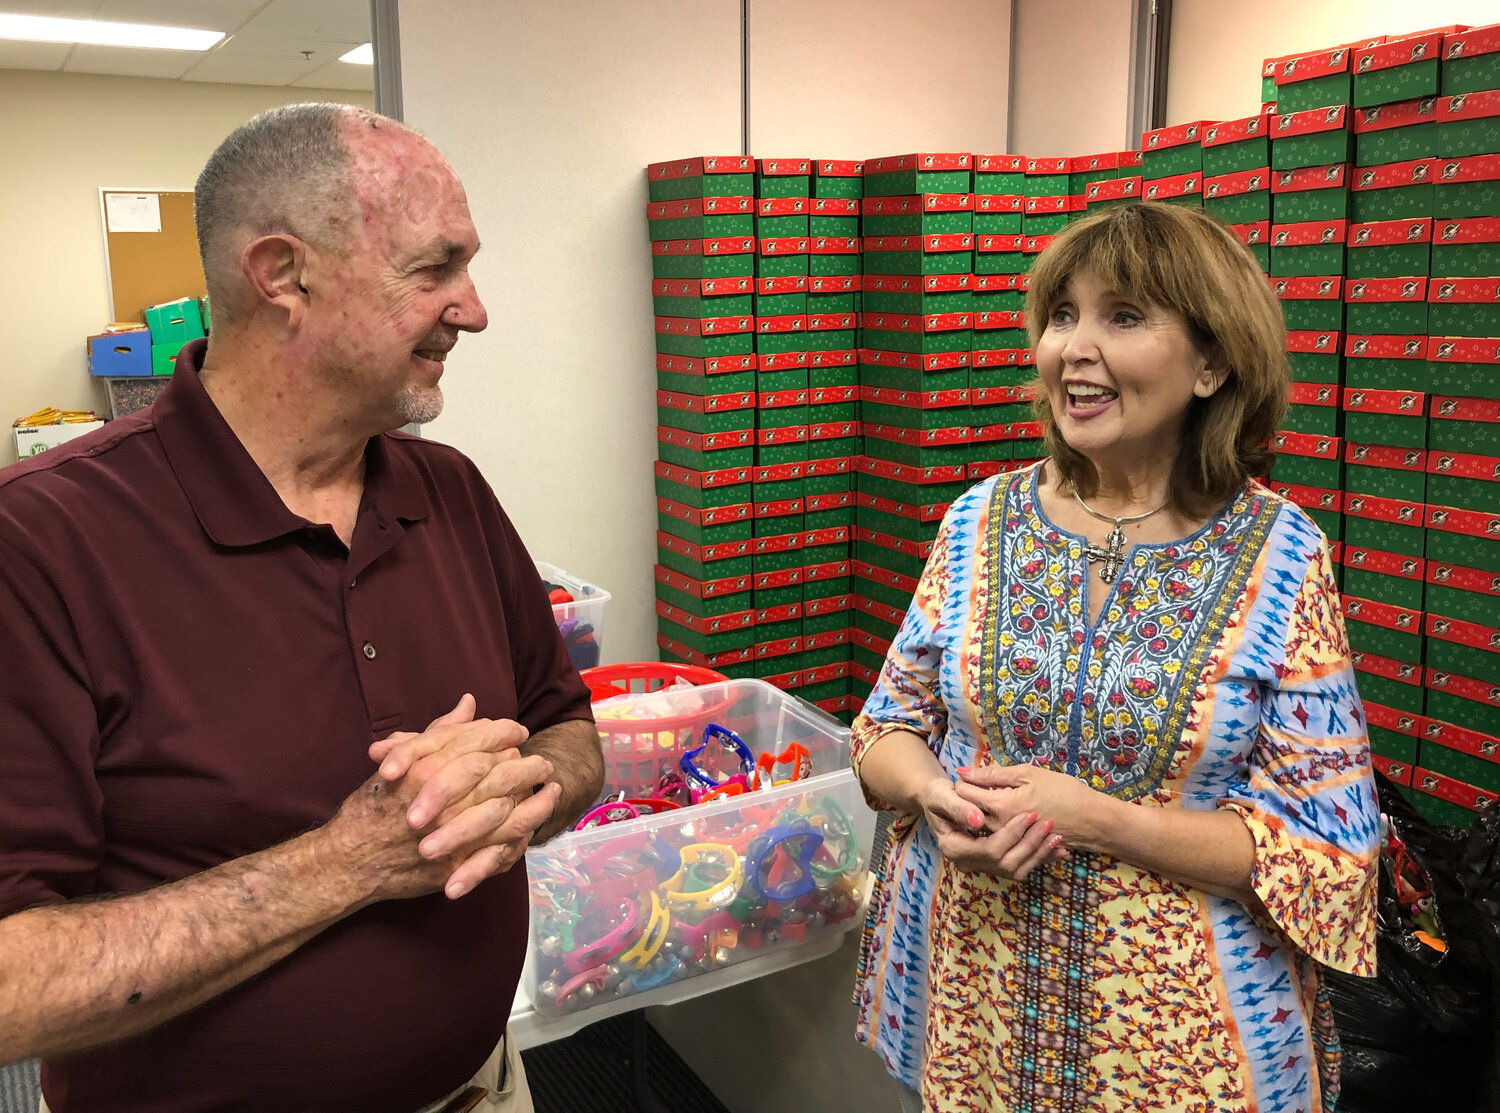 Ed McMullen, supported his wife, Margaret, in Macland’s shoebox project to send thousands of Christmas boxes to children around the world. (Photo/Macland Baptist Church)